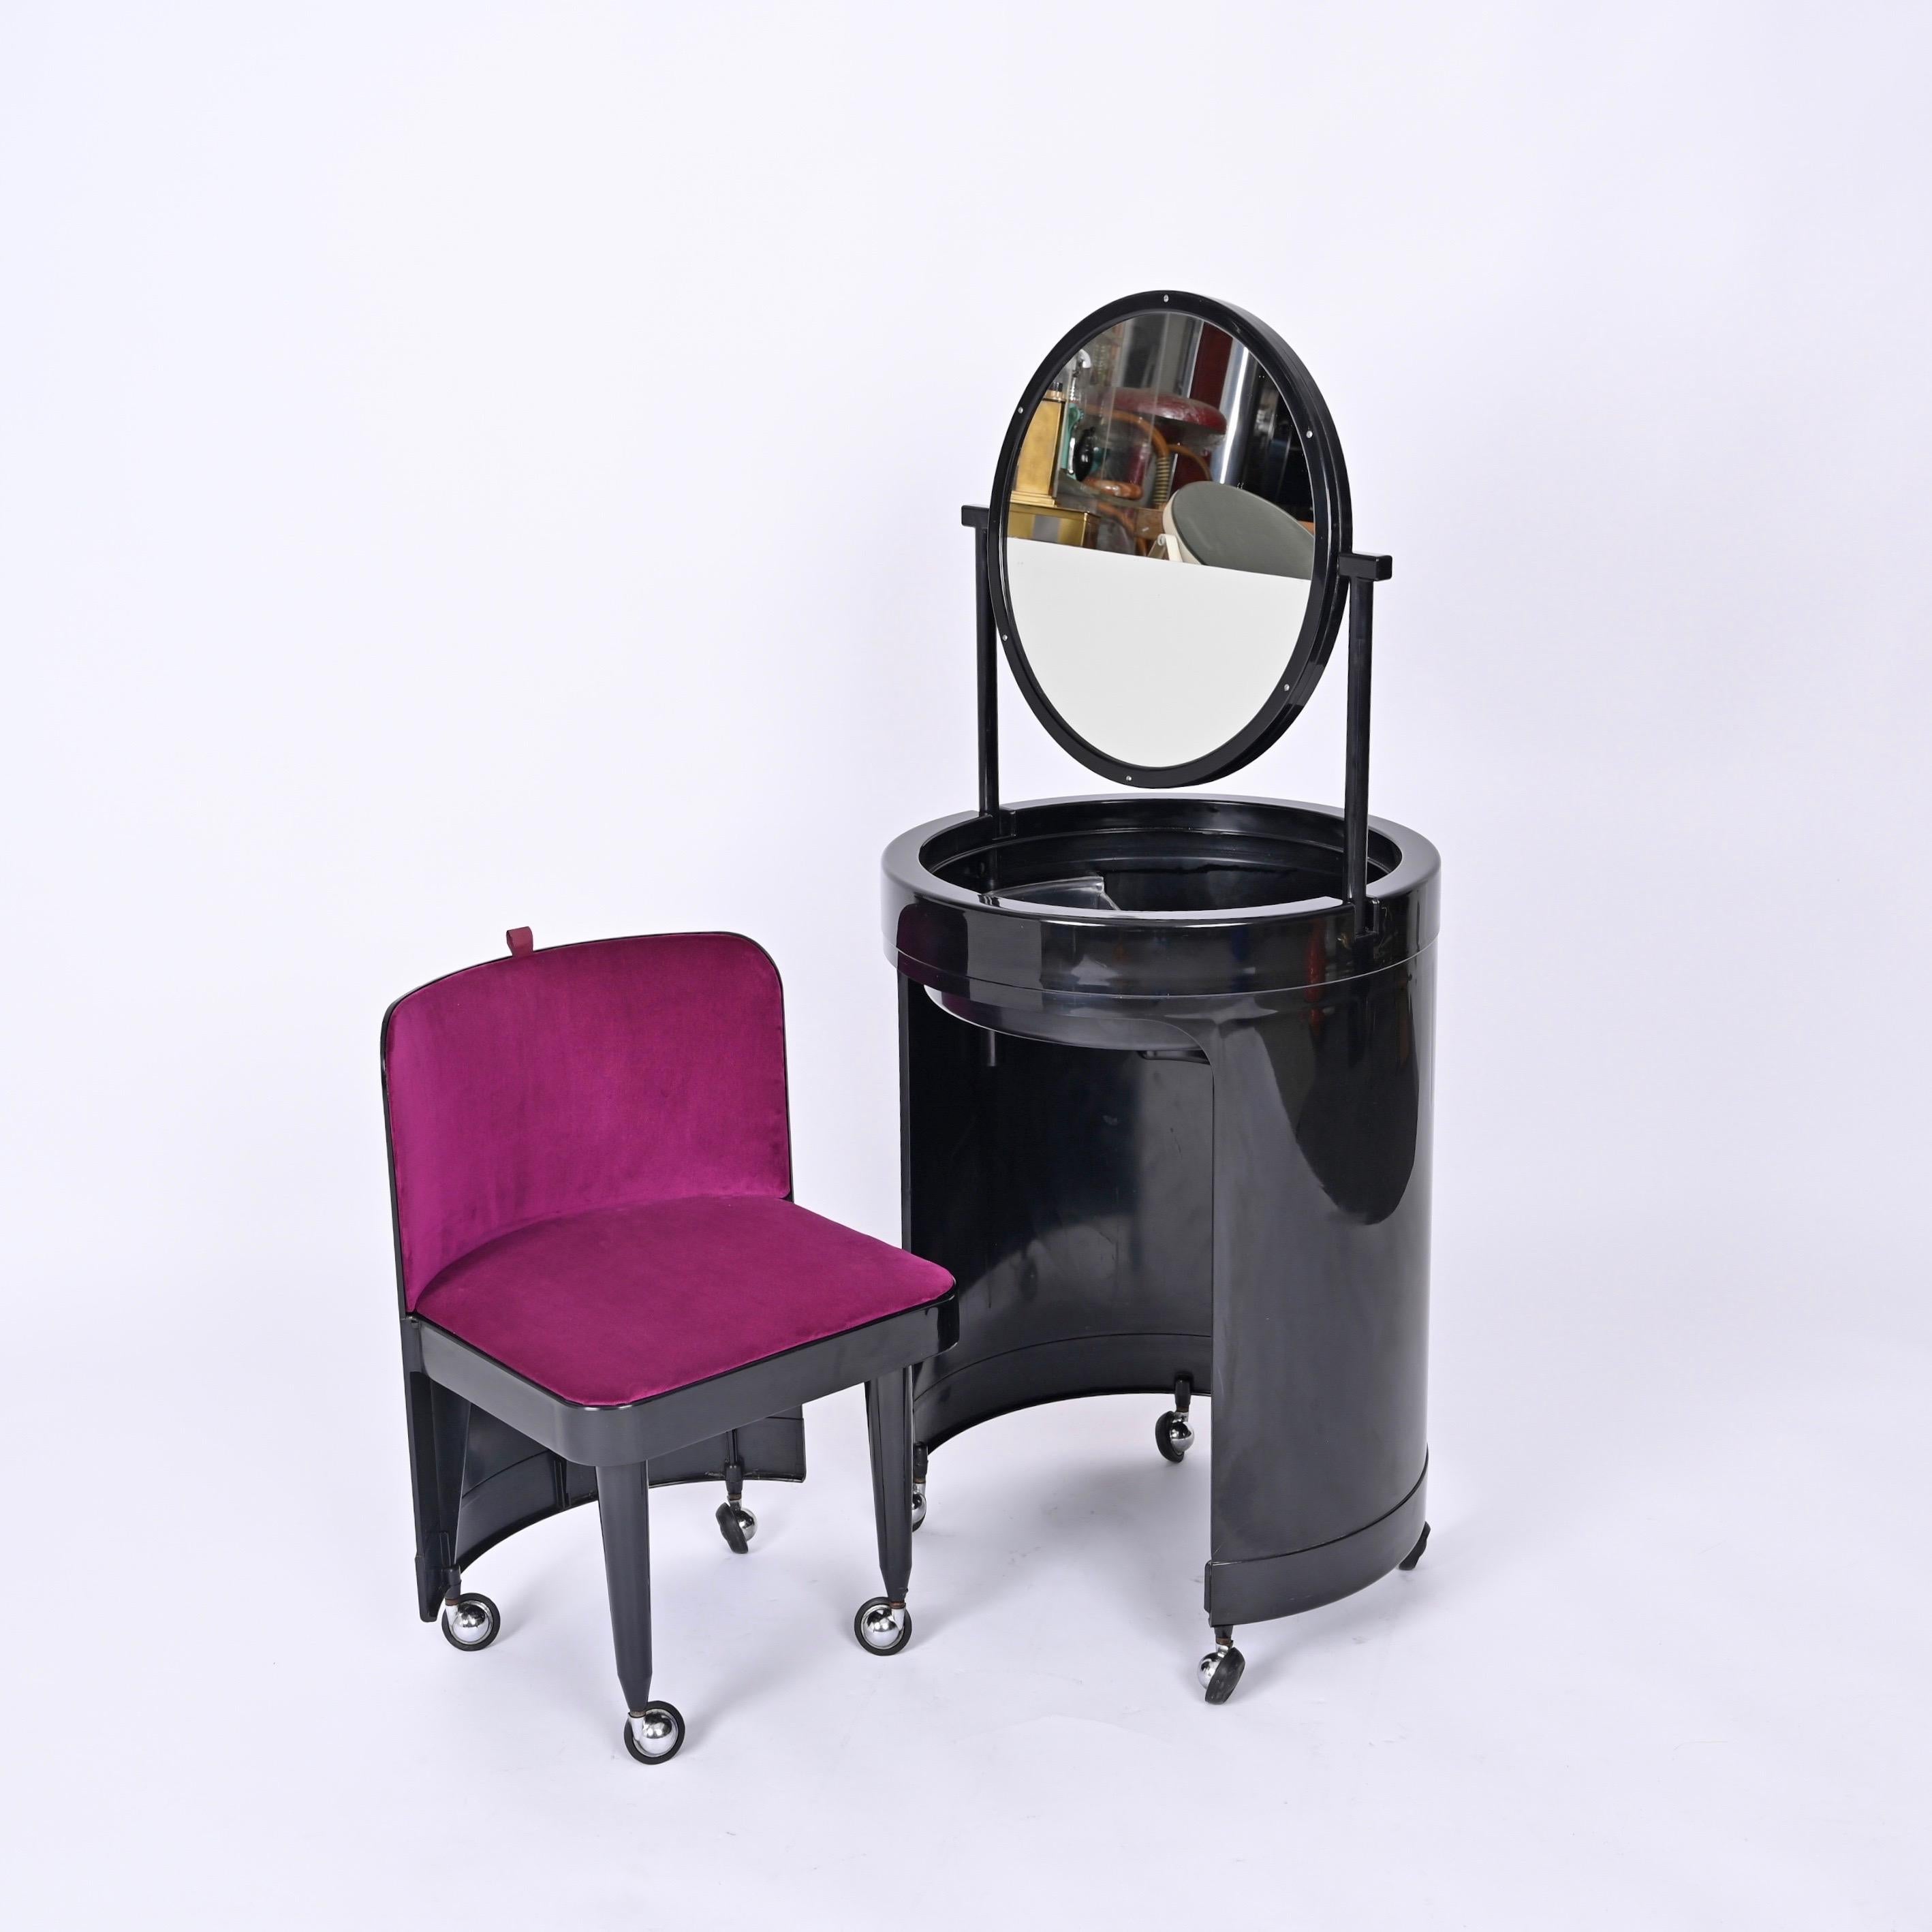 Fantastic midcentury transformable vanity table with stool and mirror. This stunning item was designed in Italy during the 1970s and is signed by Studio Kastilia.

This unique piece can be used as a table (51 cms diameter and 71 cms height) and